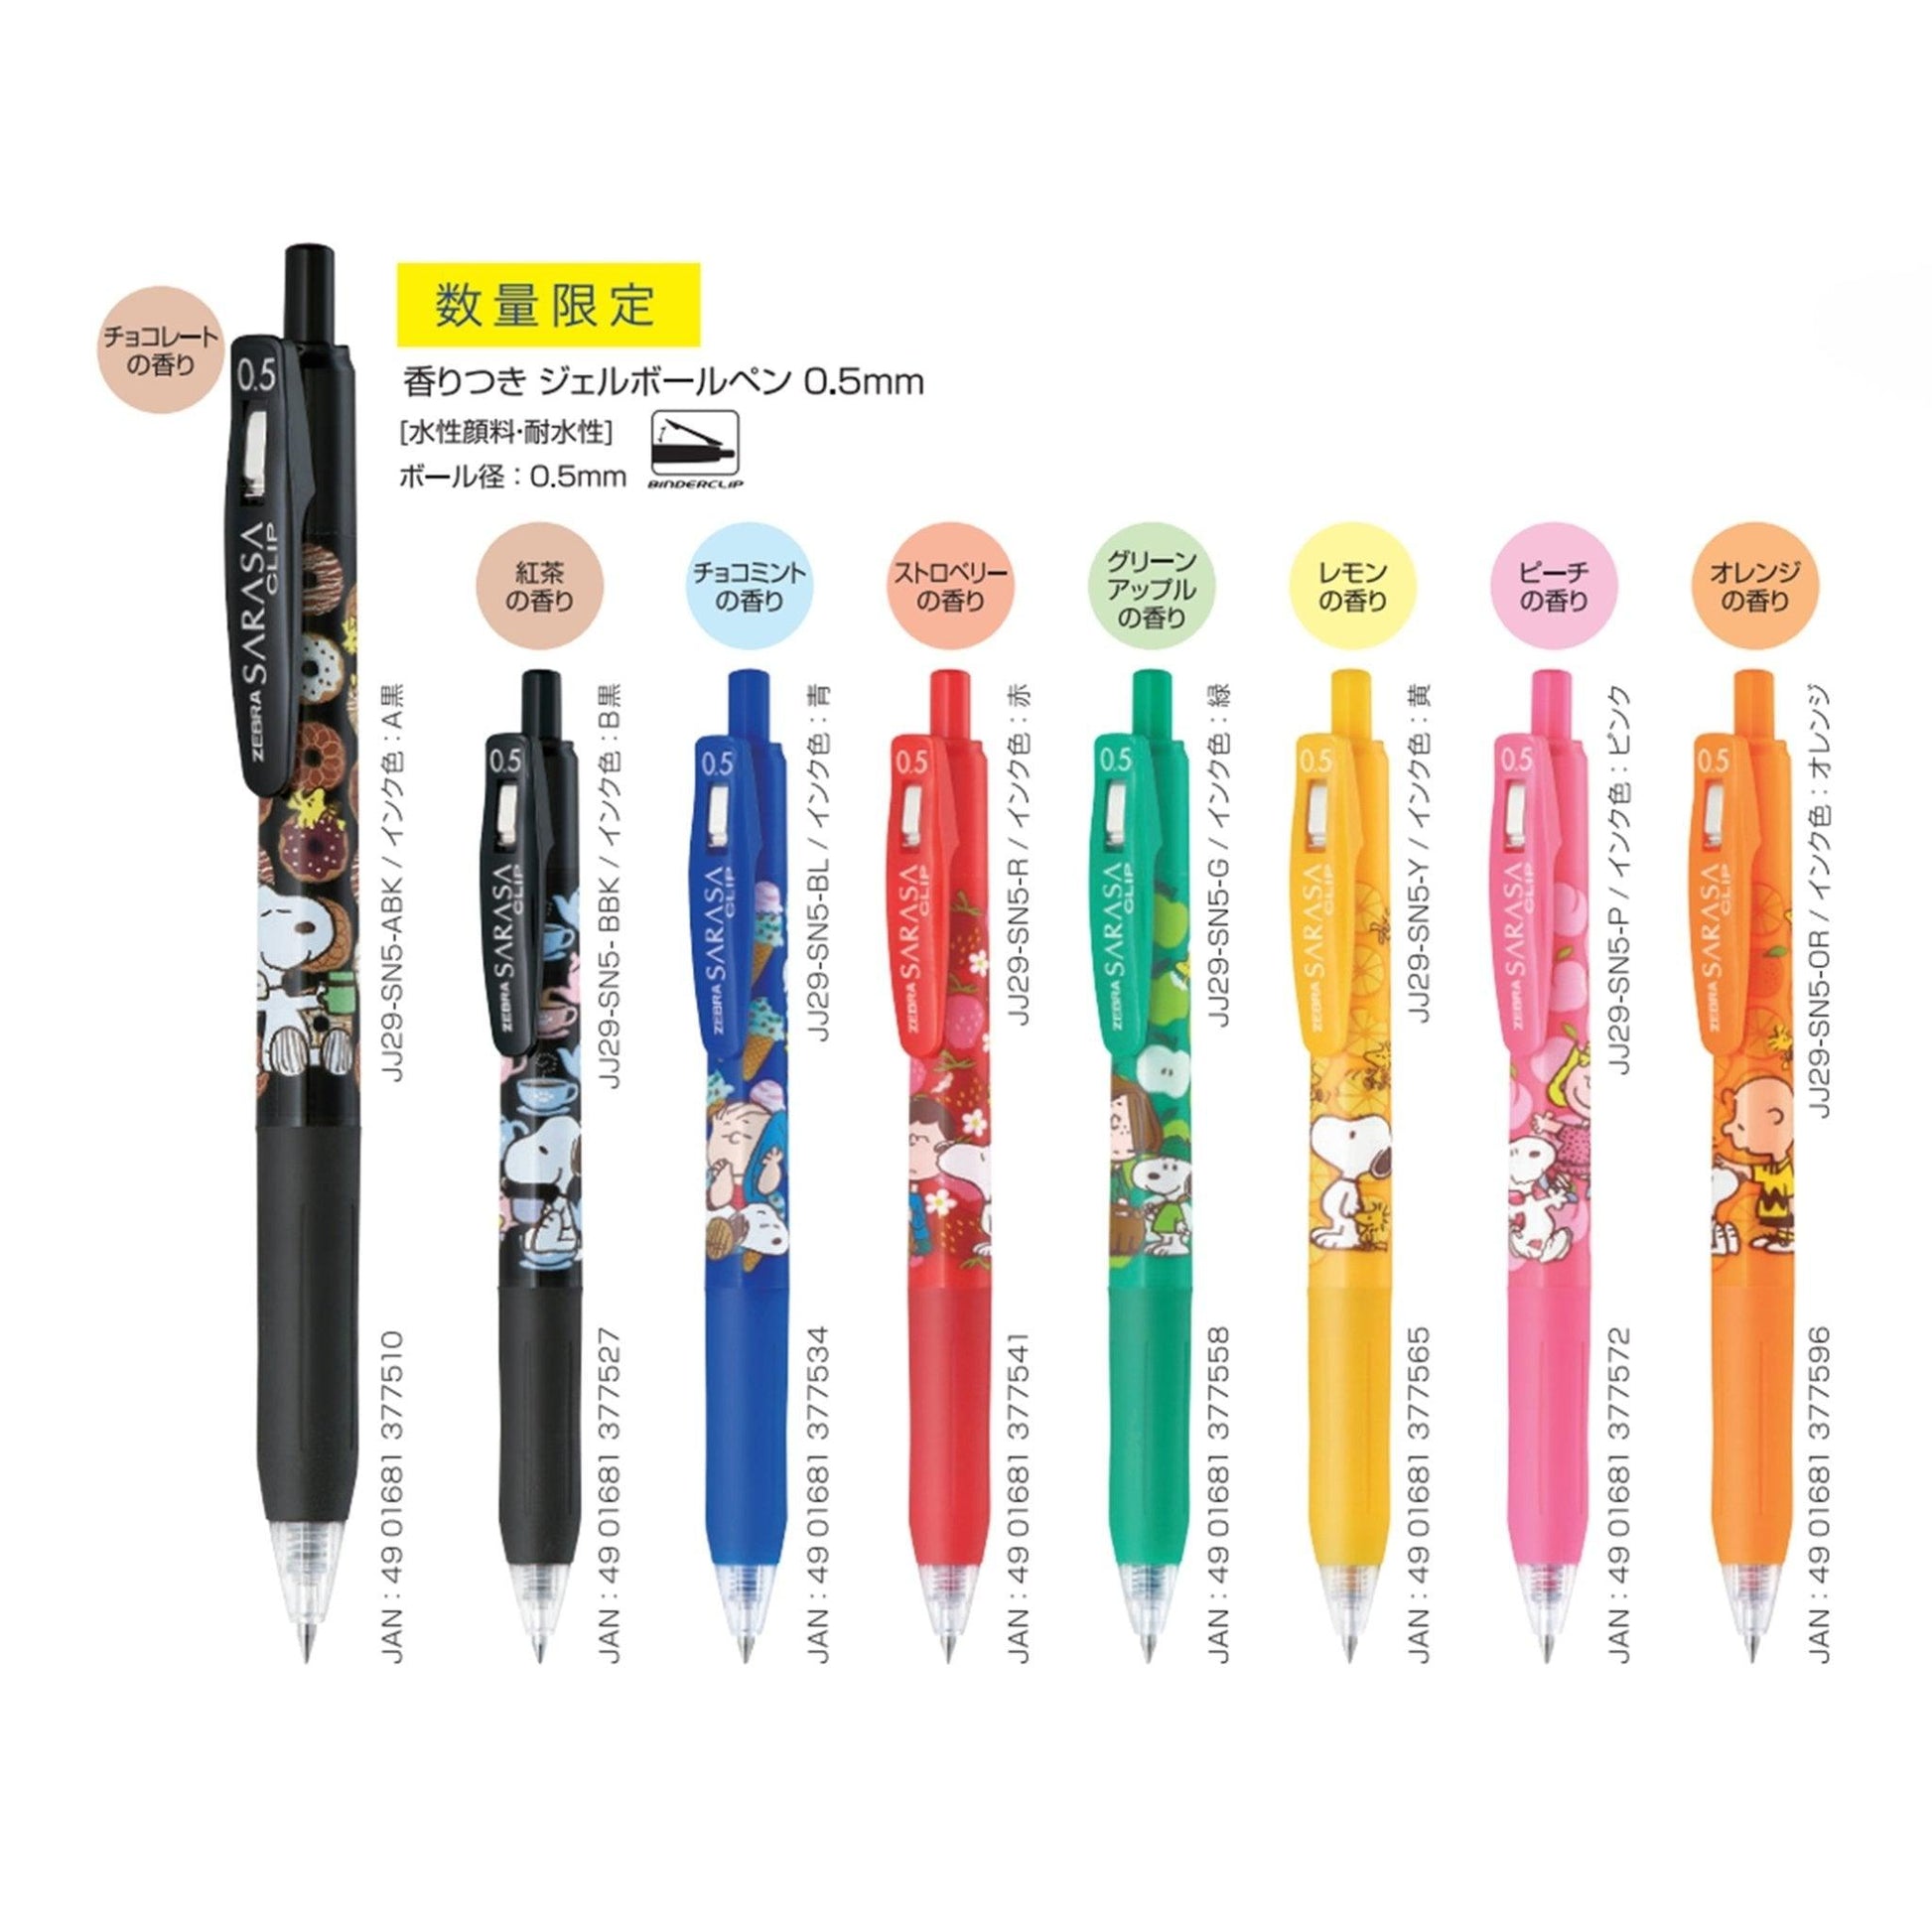 ZEBRA SARASA 0.5MM limited Snoopy scented gel pen ball pen 3 color set - CHL-STORE 